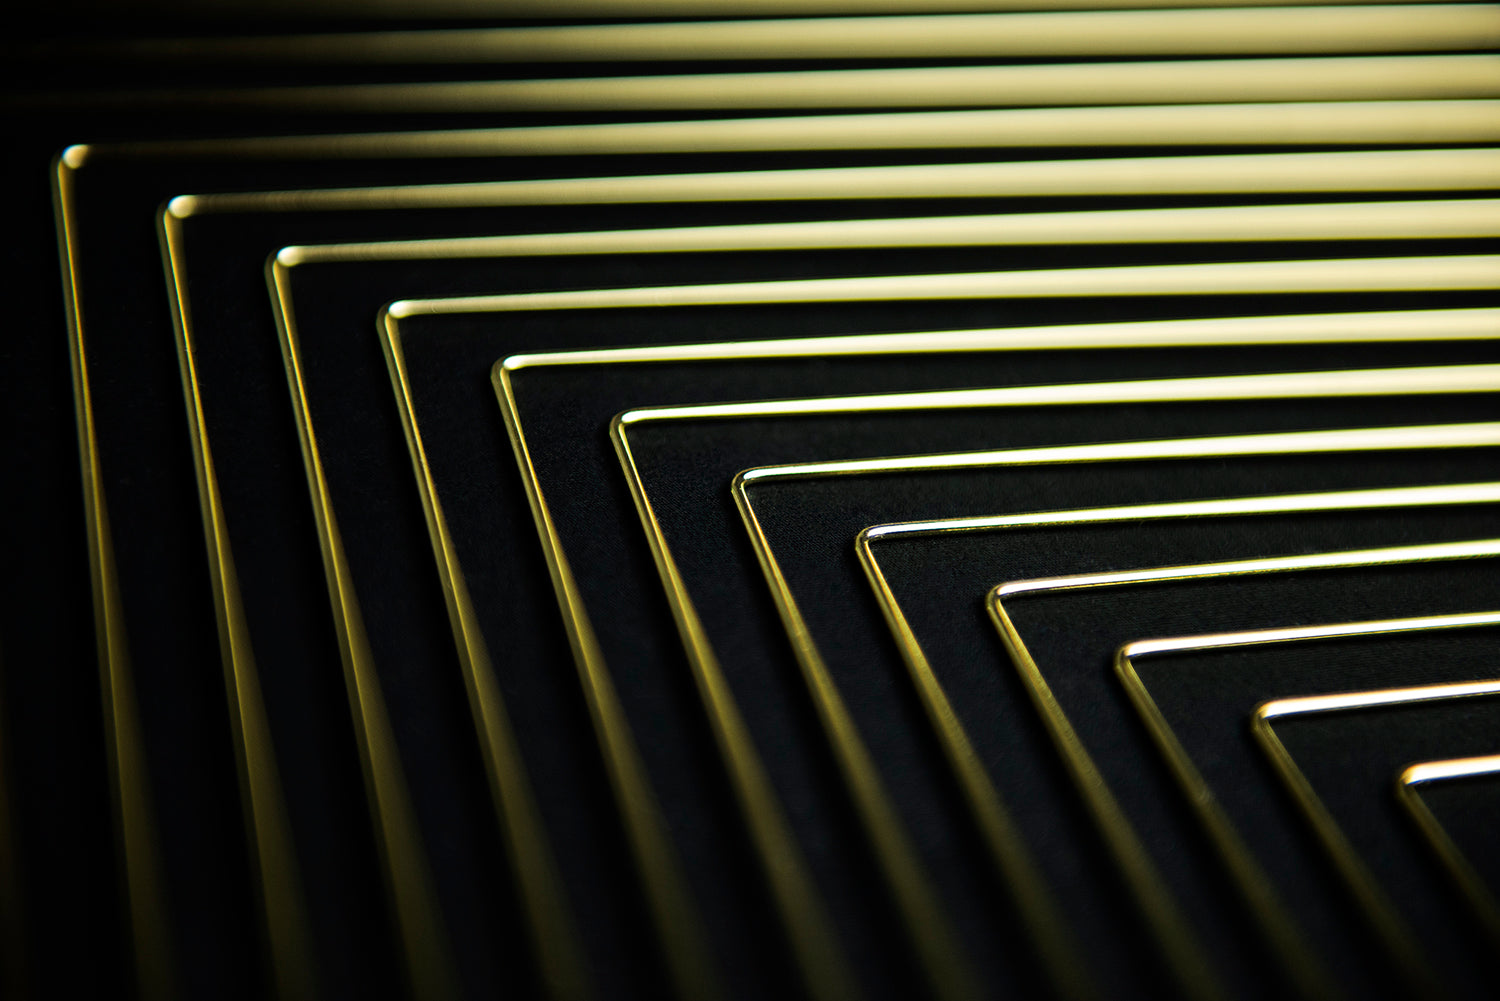 A detail of Square Wave Lunar Gold